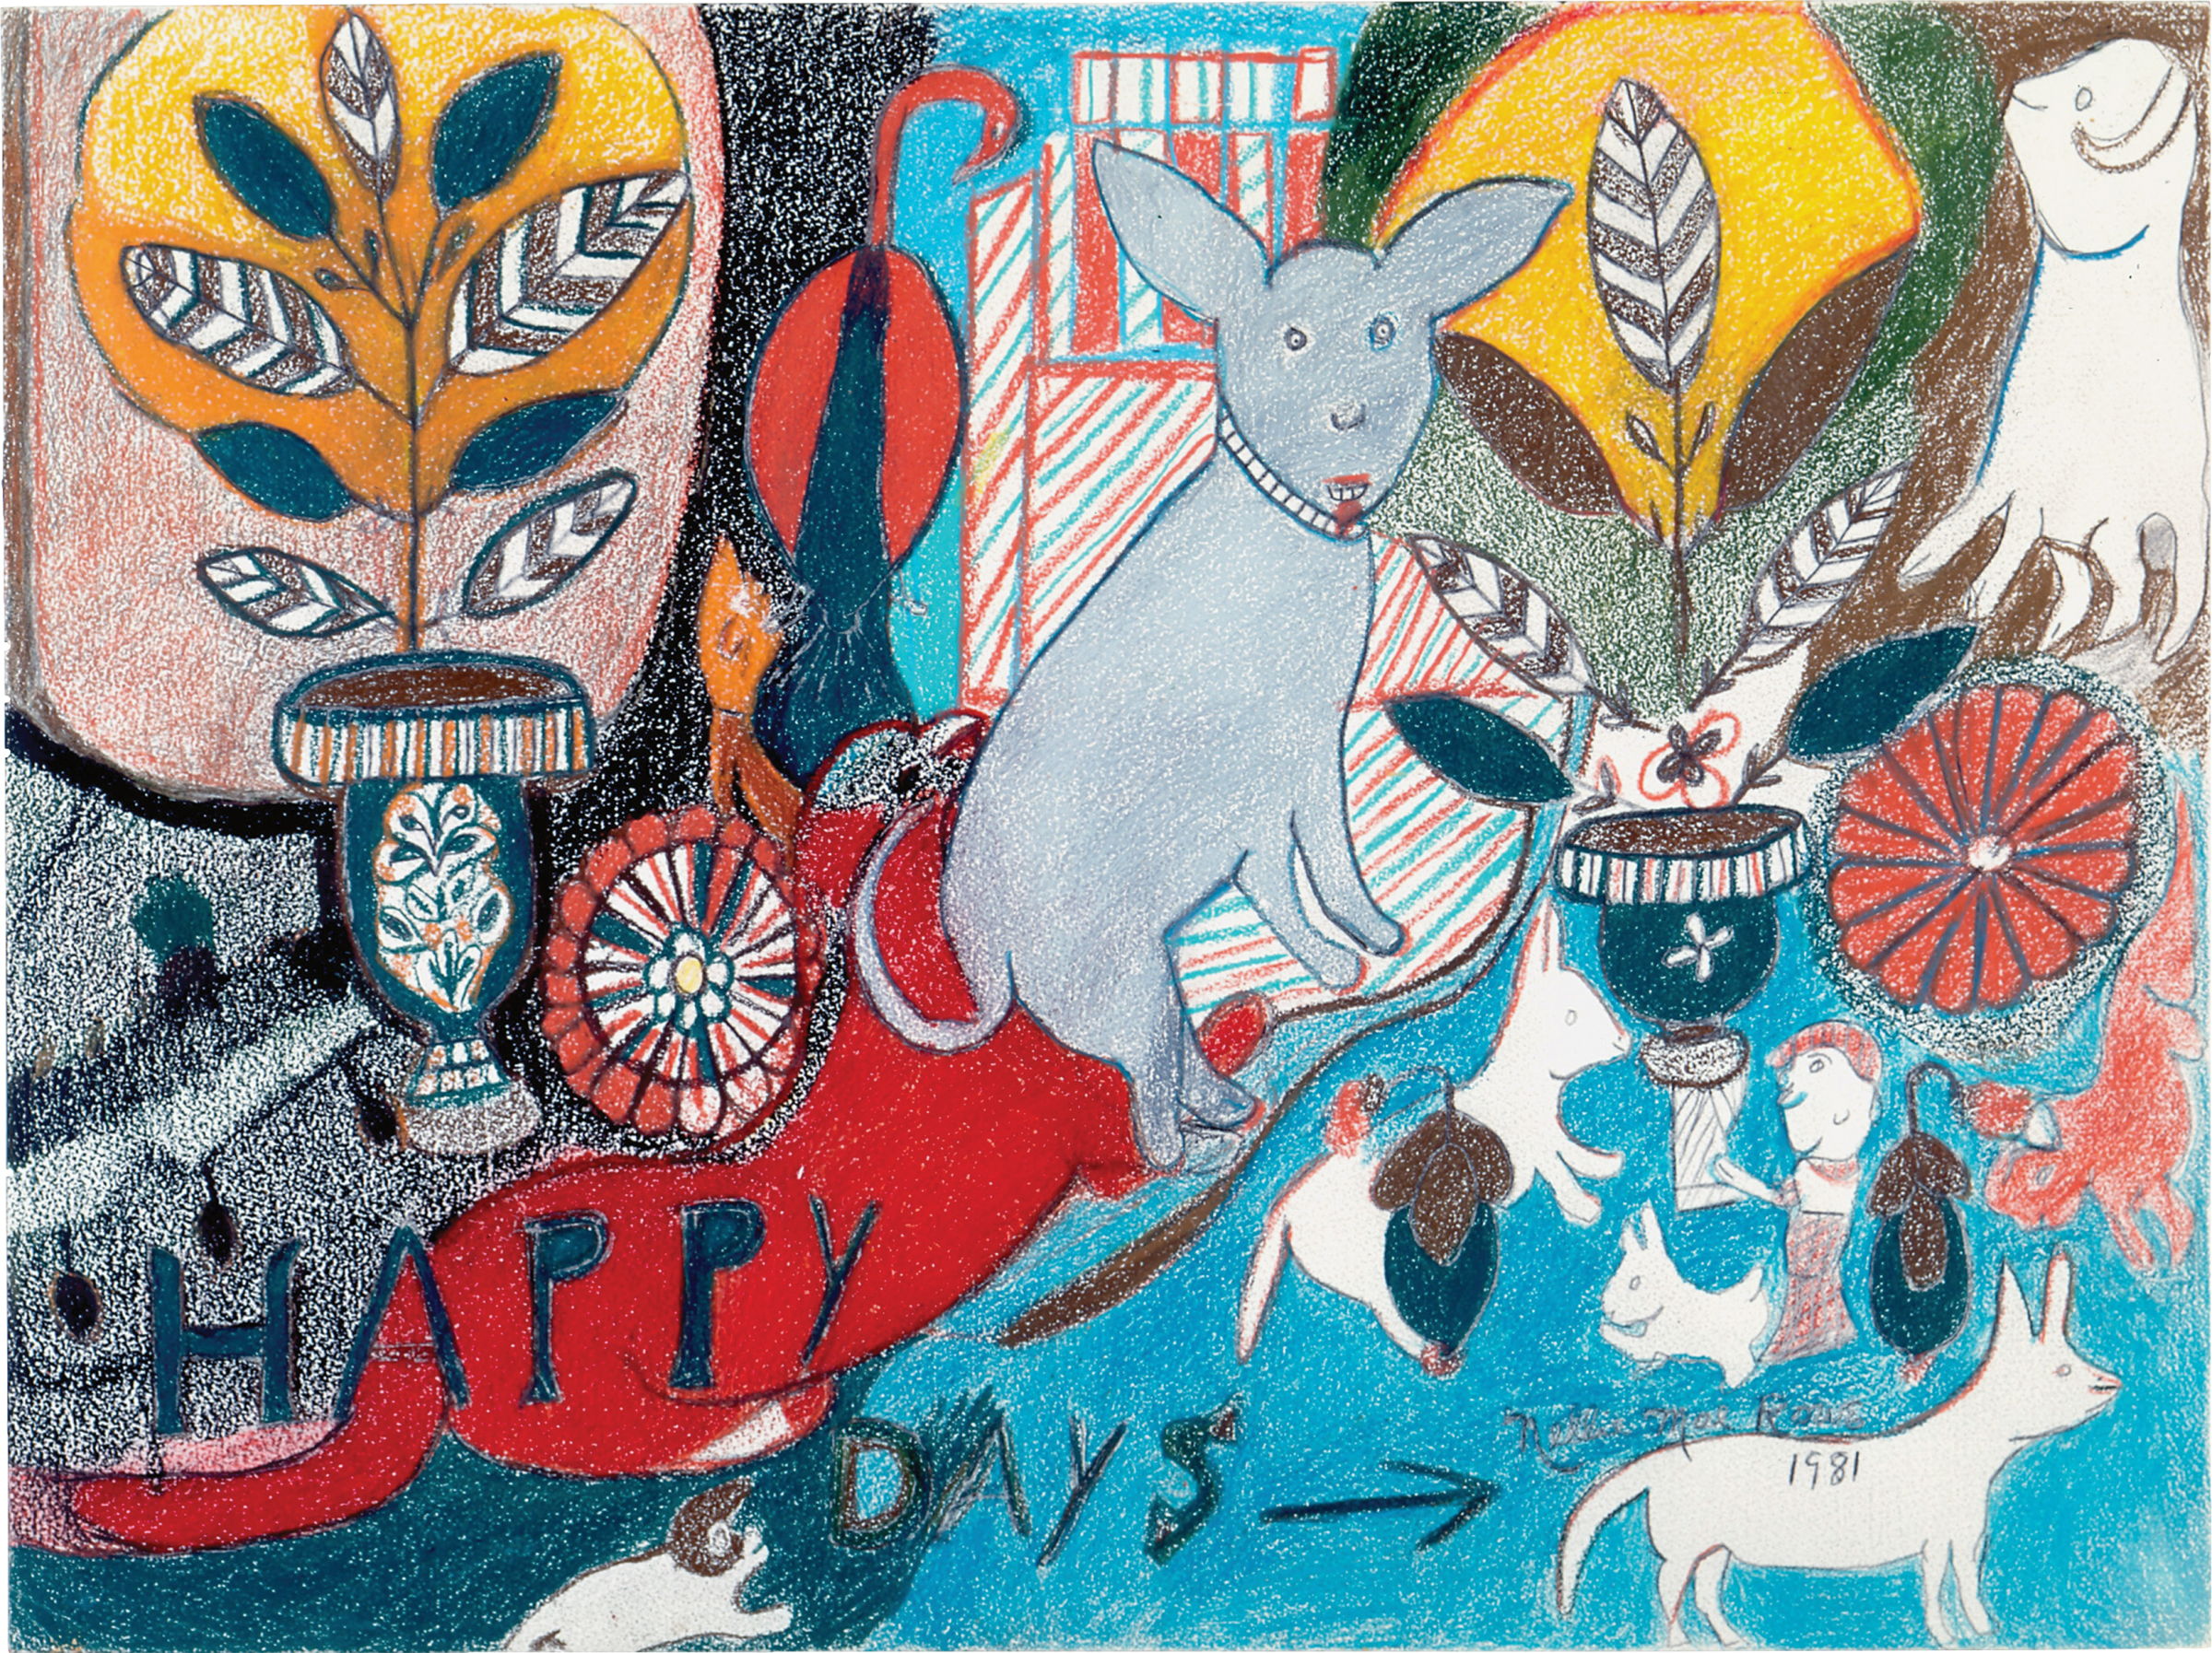 Several plants and animals are depicted in a black, cerulean blue, green, and red background; the bottom of the artwork says, “Happy Days” with an arrow pointing to the right.